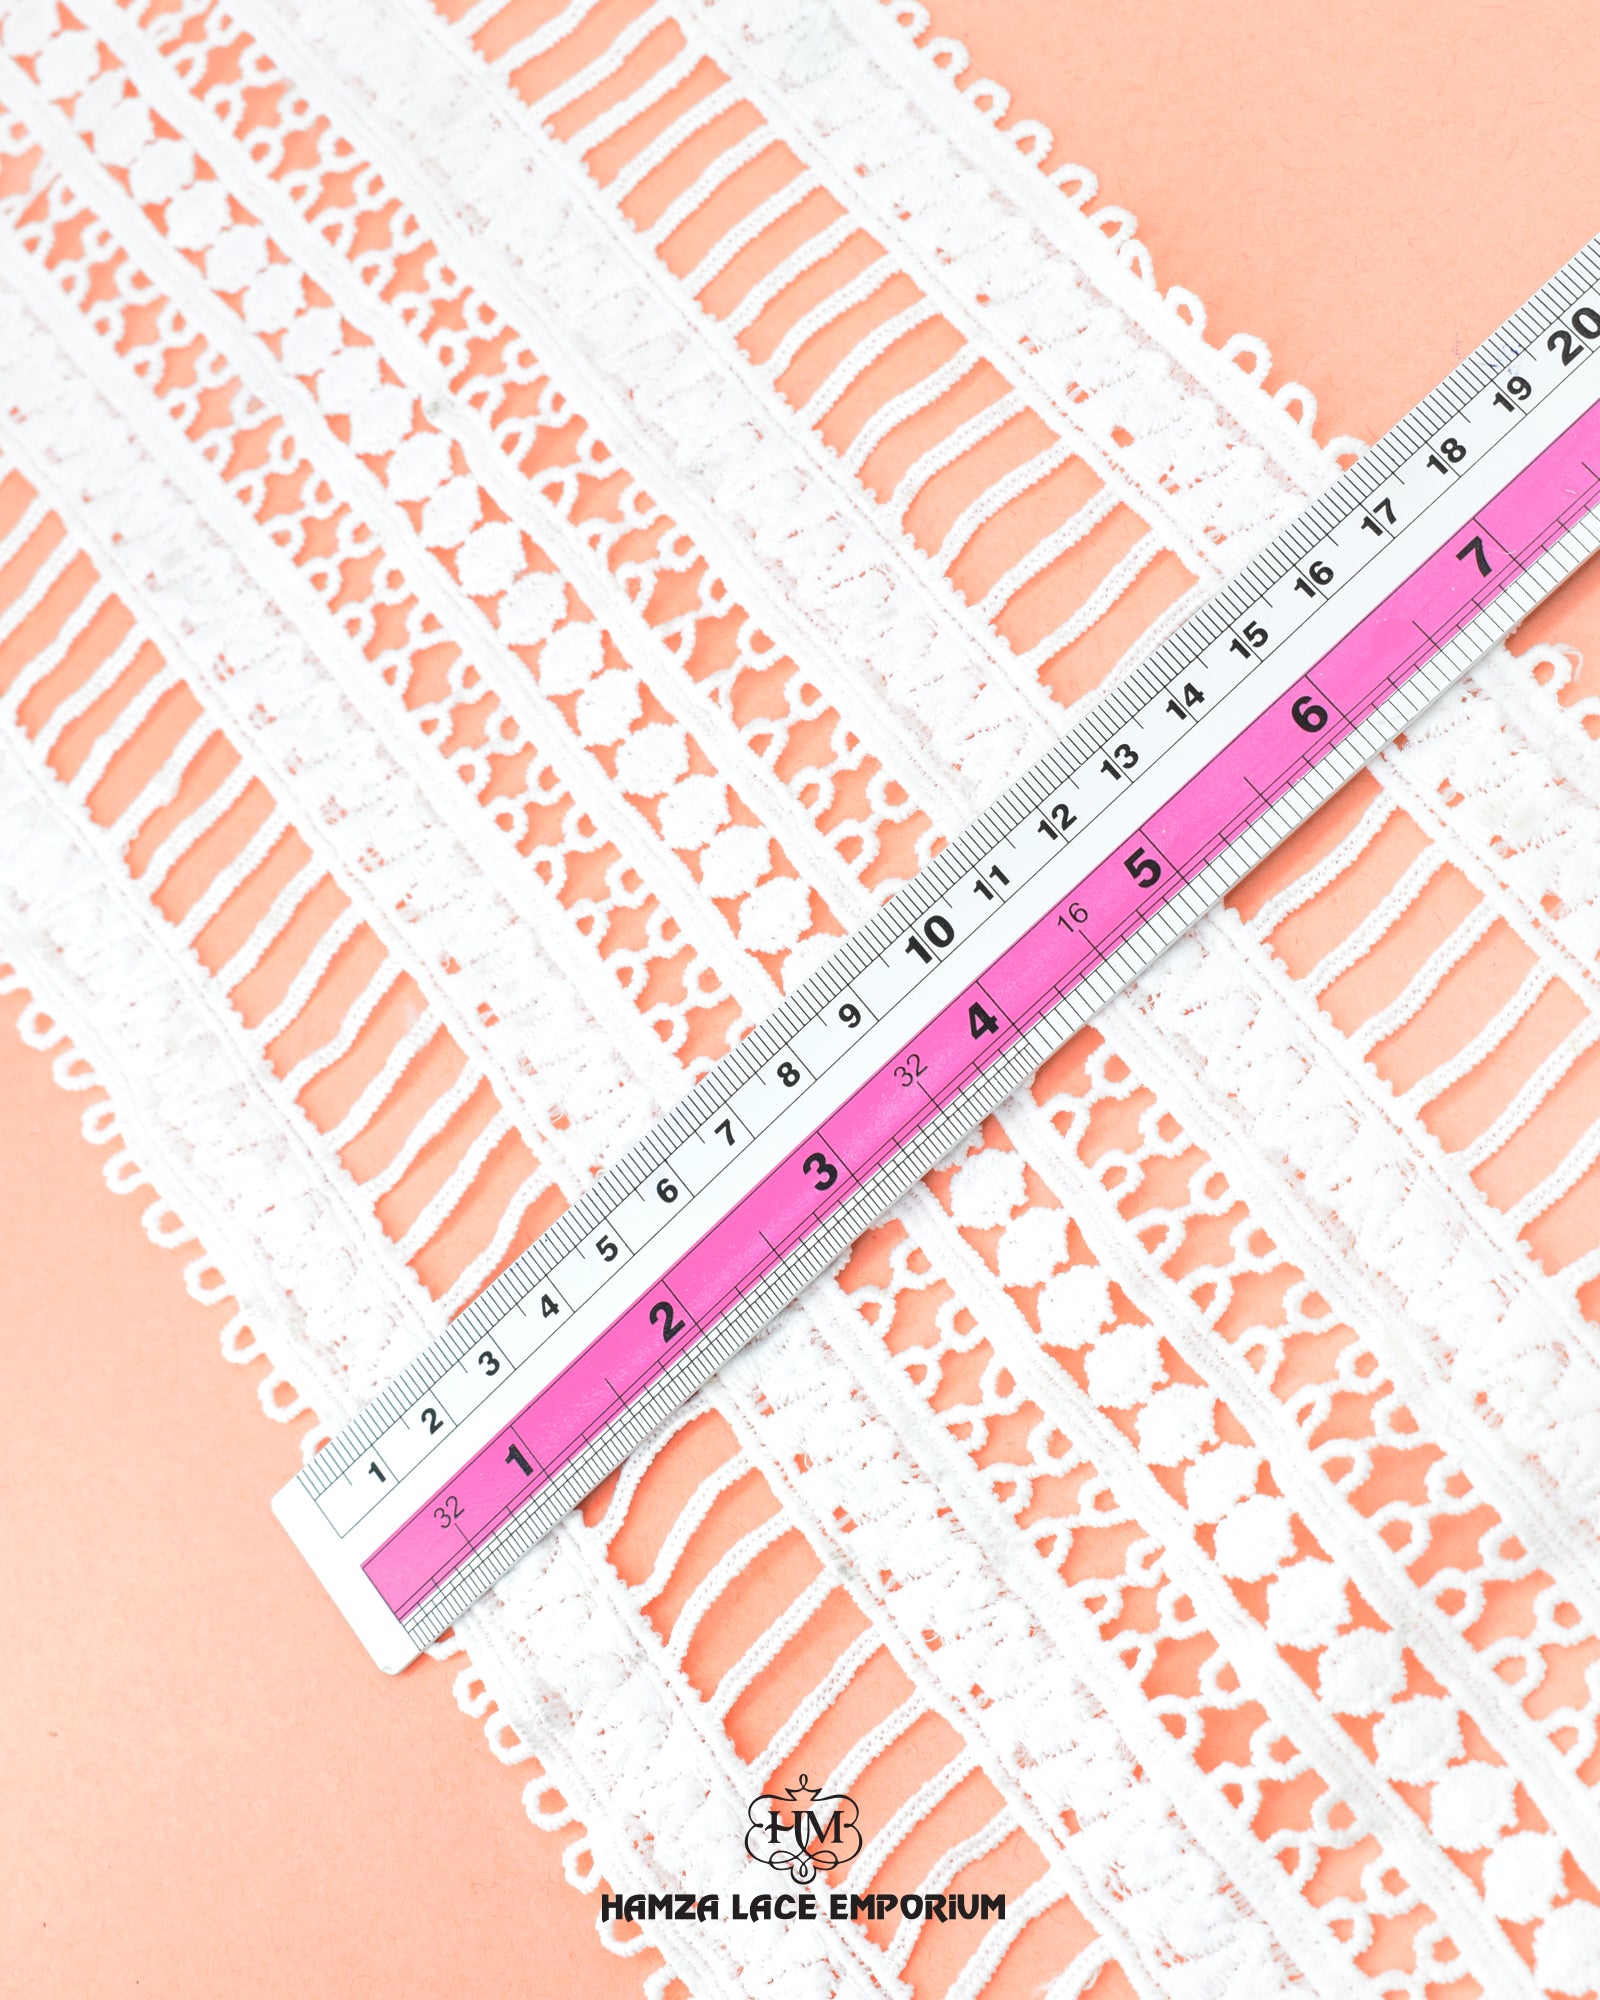 Size of the 'Center Filling Lace 23383' is given as '7' inches by placing a ruler on it